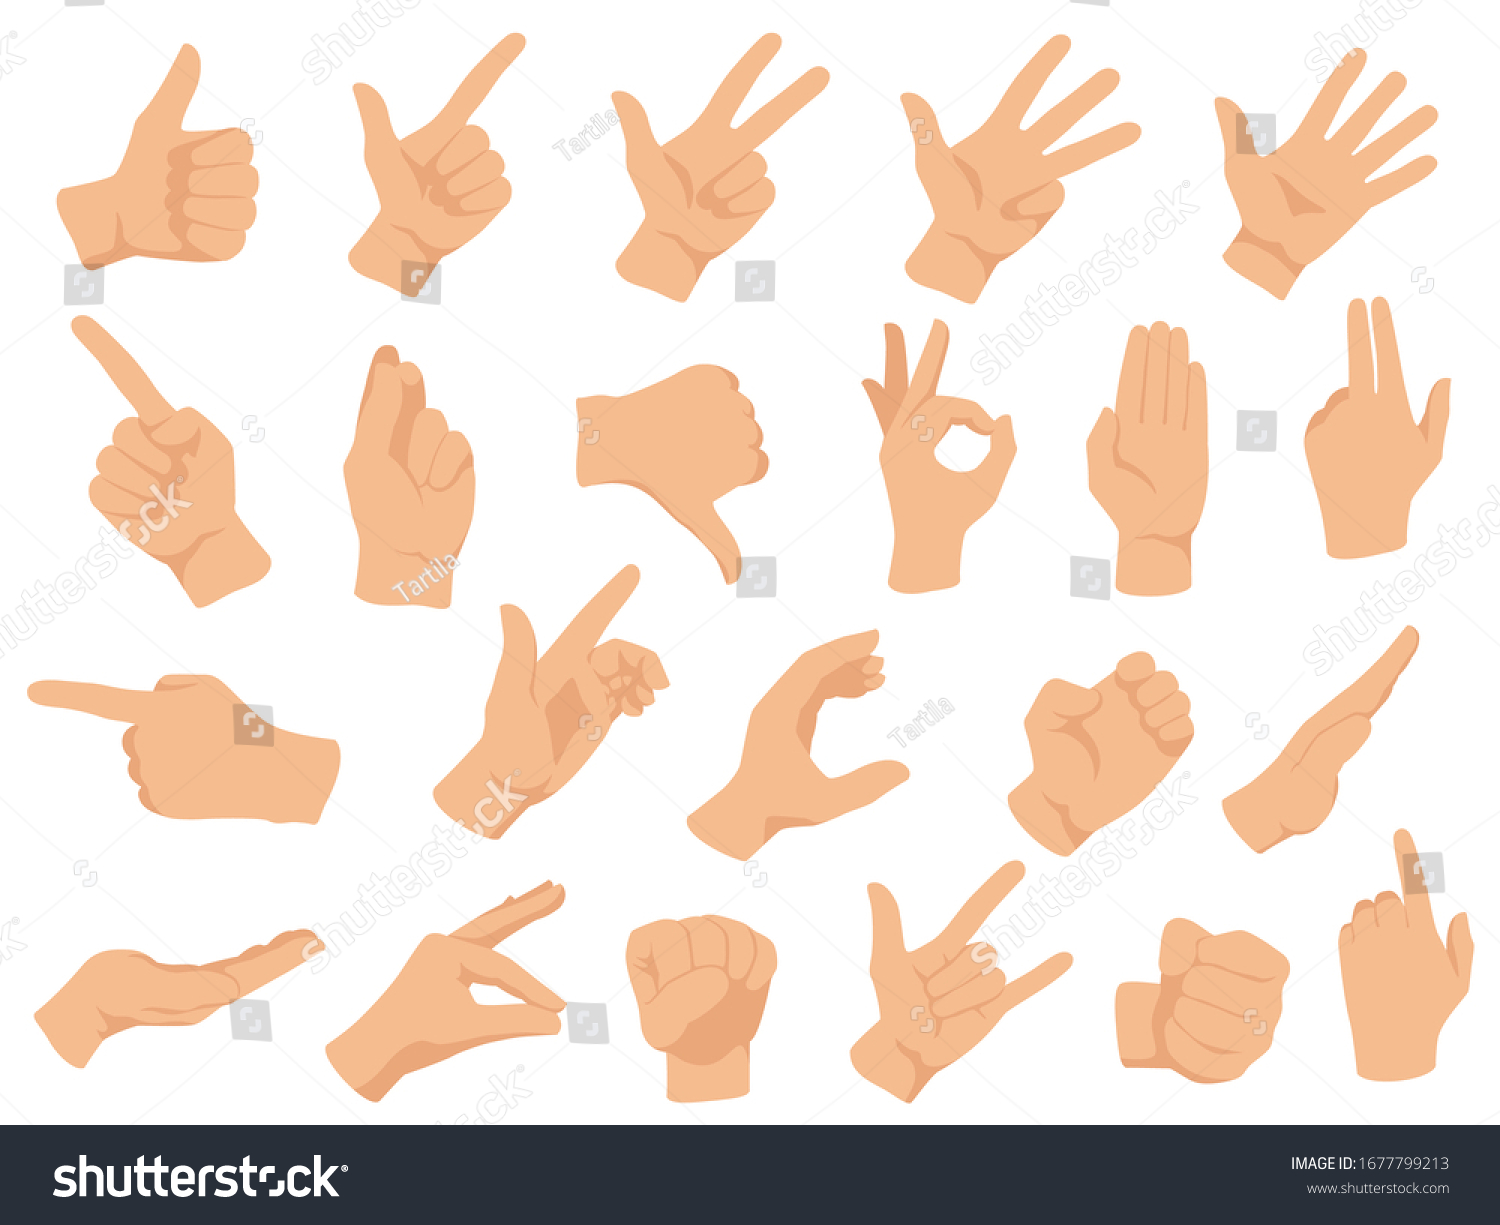 Hand gestures. Vector illustration set, counting fingers. Gesture palm, pointing hand, communication language, pose and gesturing #1677799213